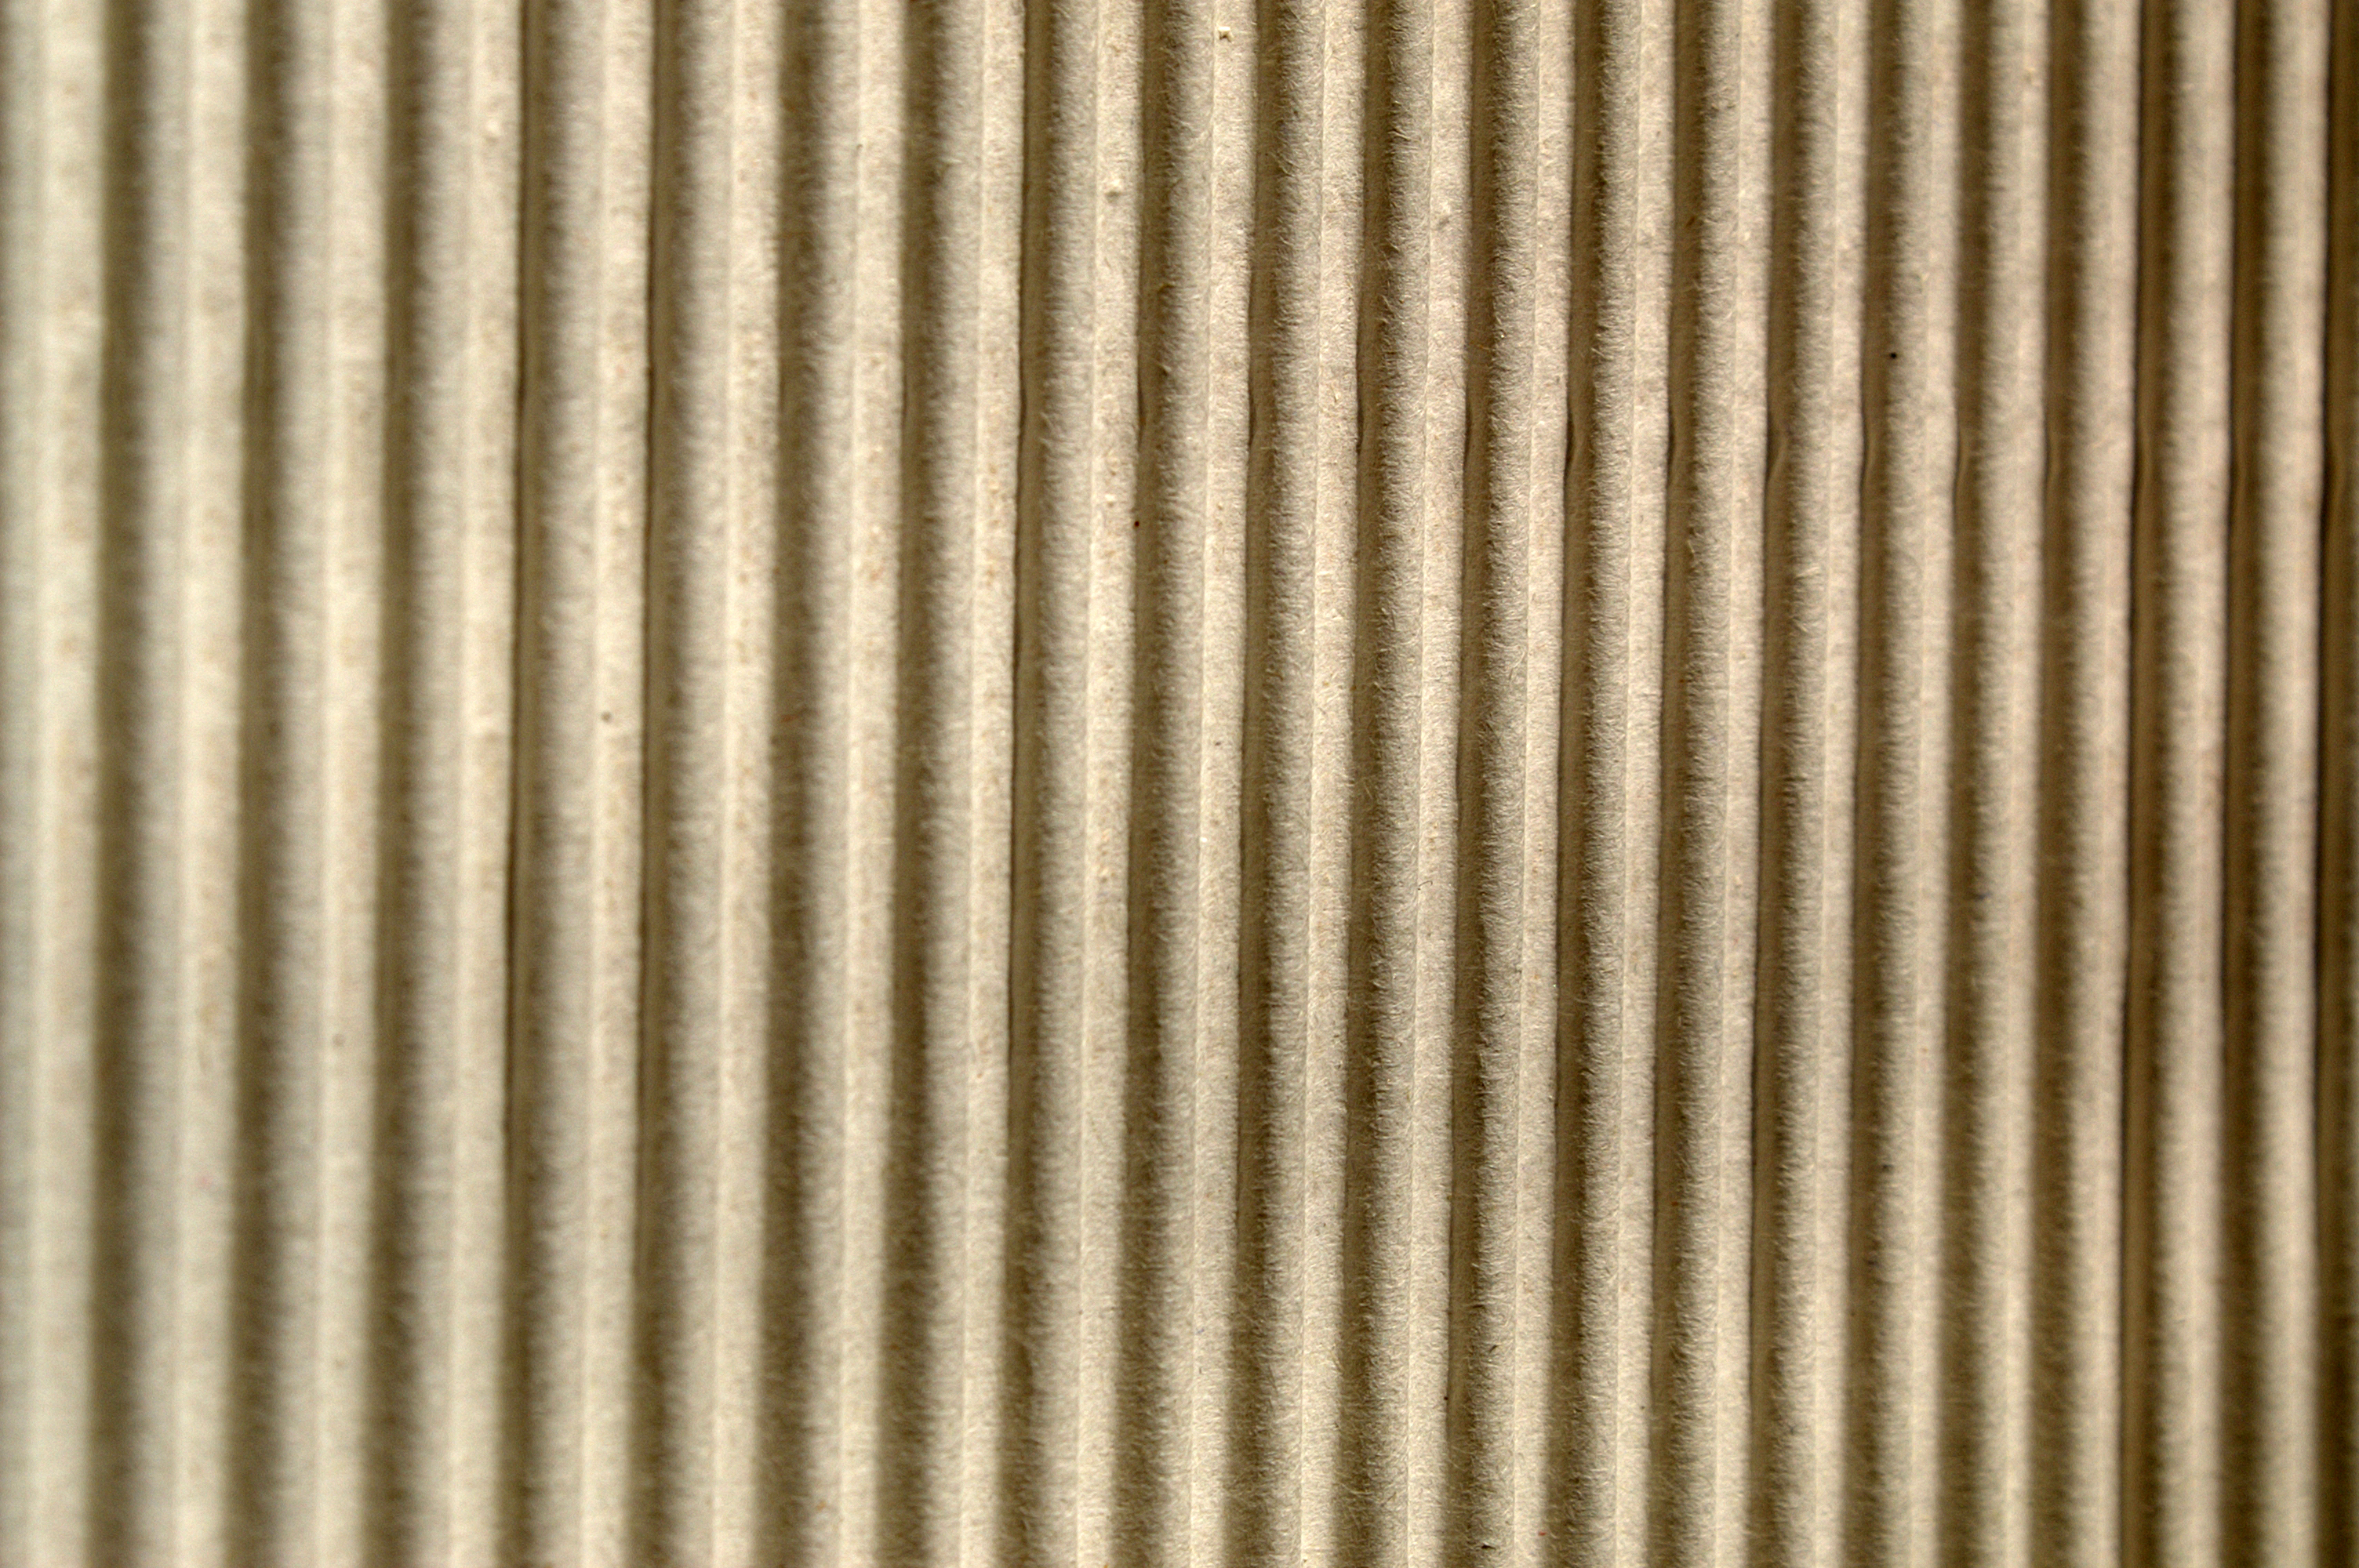 69+ Thousand Corrugated Cardboard Texture Royalty-Free Images